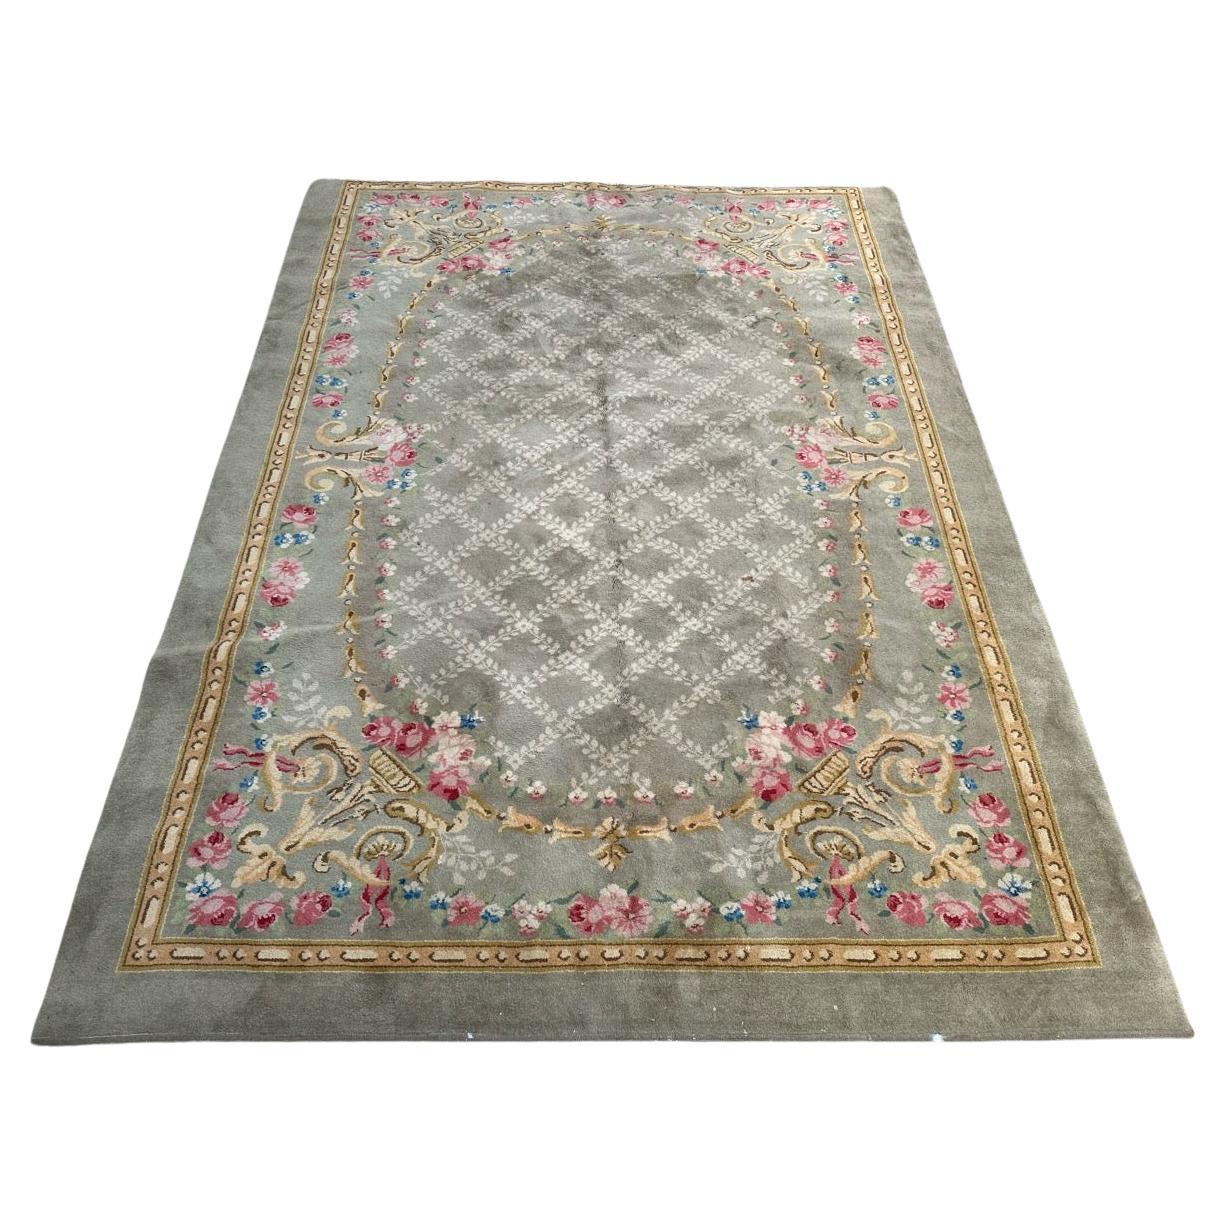 Bobyrug’s very beautiful large French hand knotted Aubusson rug savonnerie style